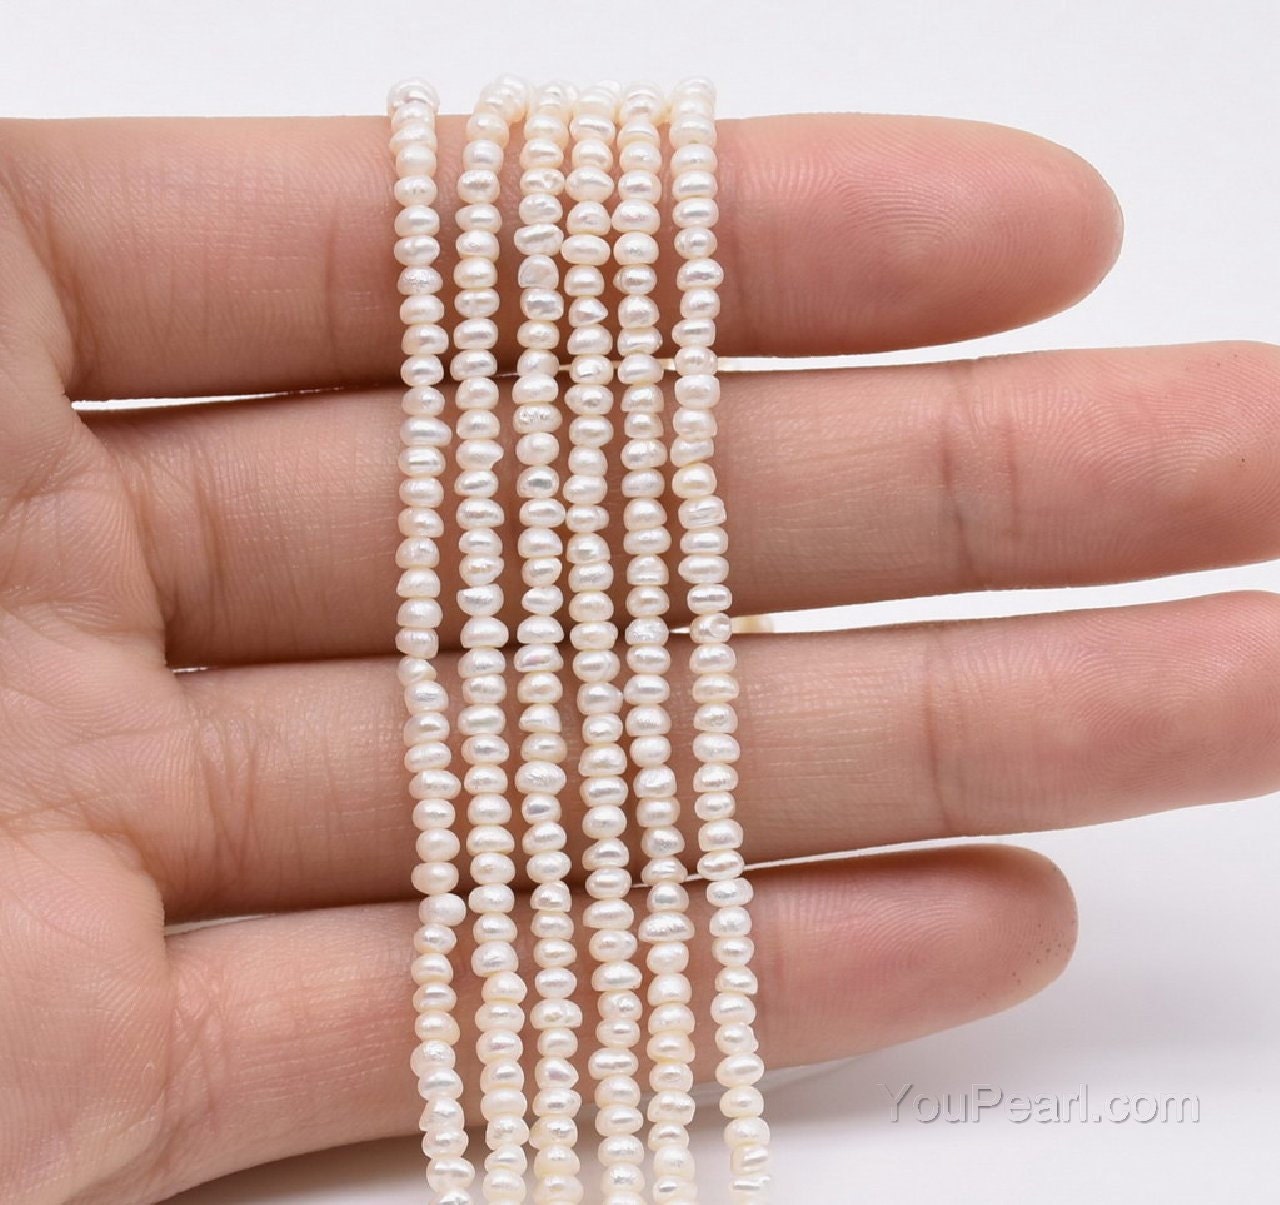 2.5-3mmm Seed Pearls, White Small Pearl Bead, Fresh Water Button Pearl,  Genuine Natural Color Tiny Pearl Bead Supplies, FS430-WS 